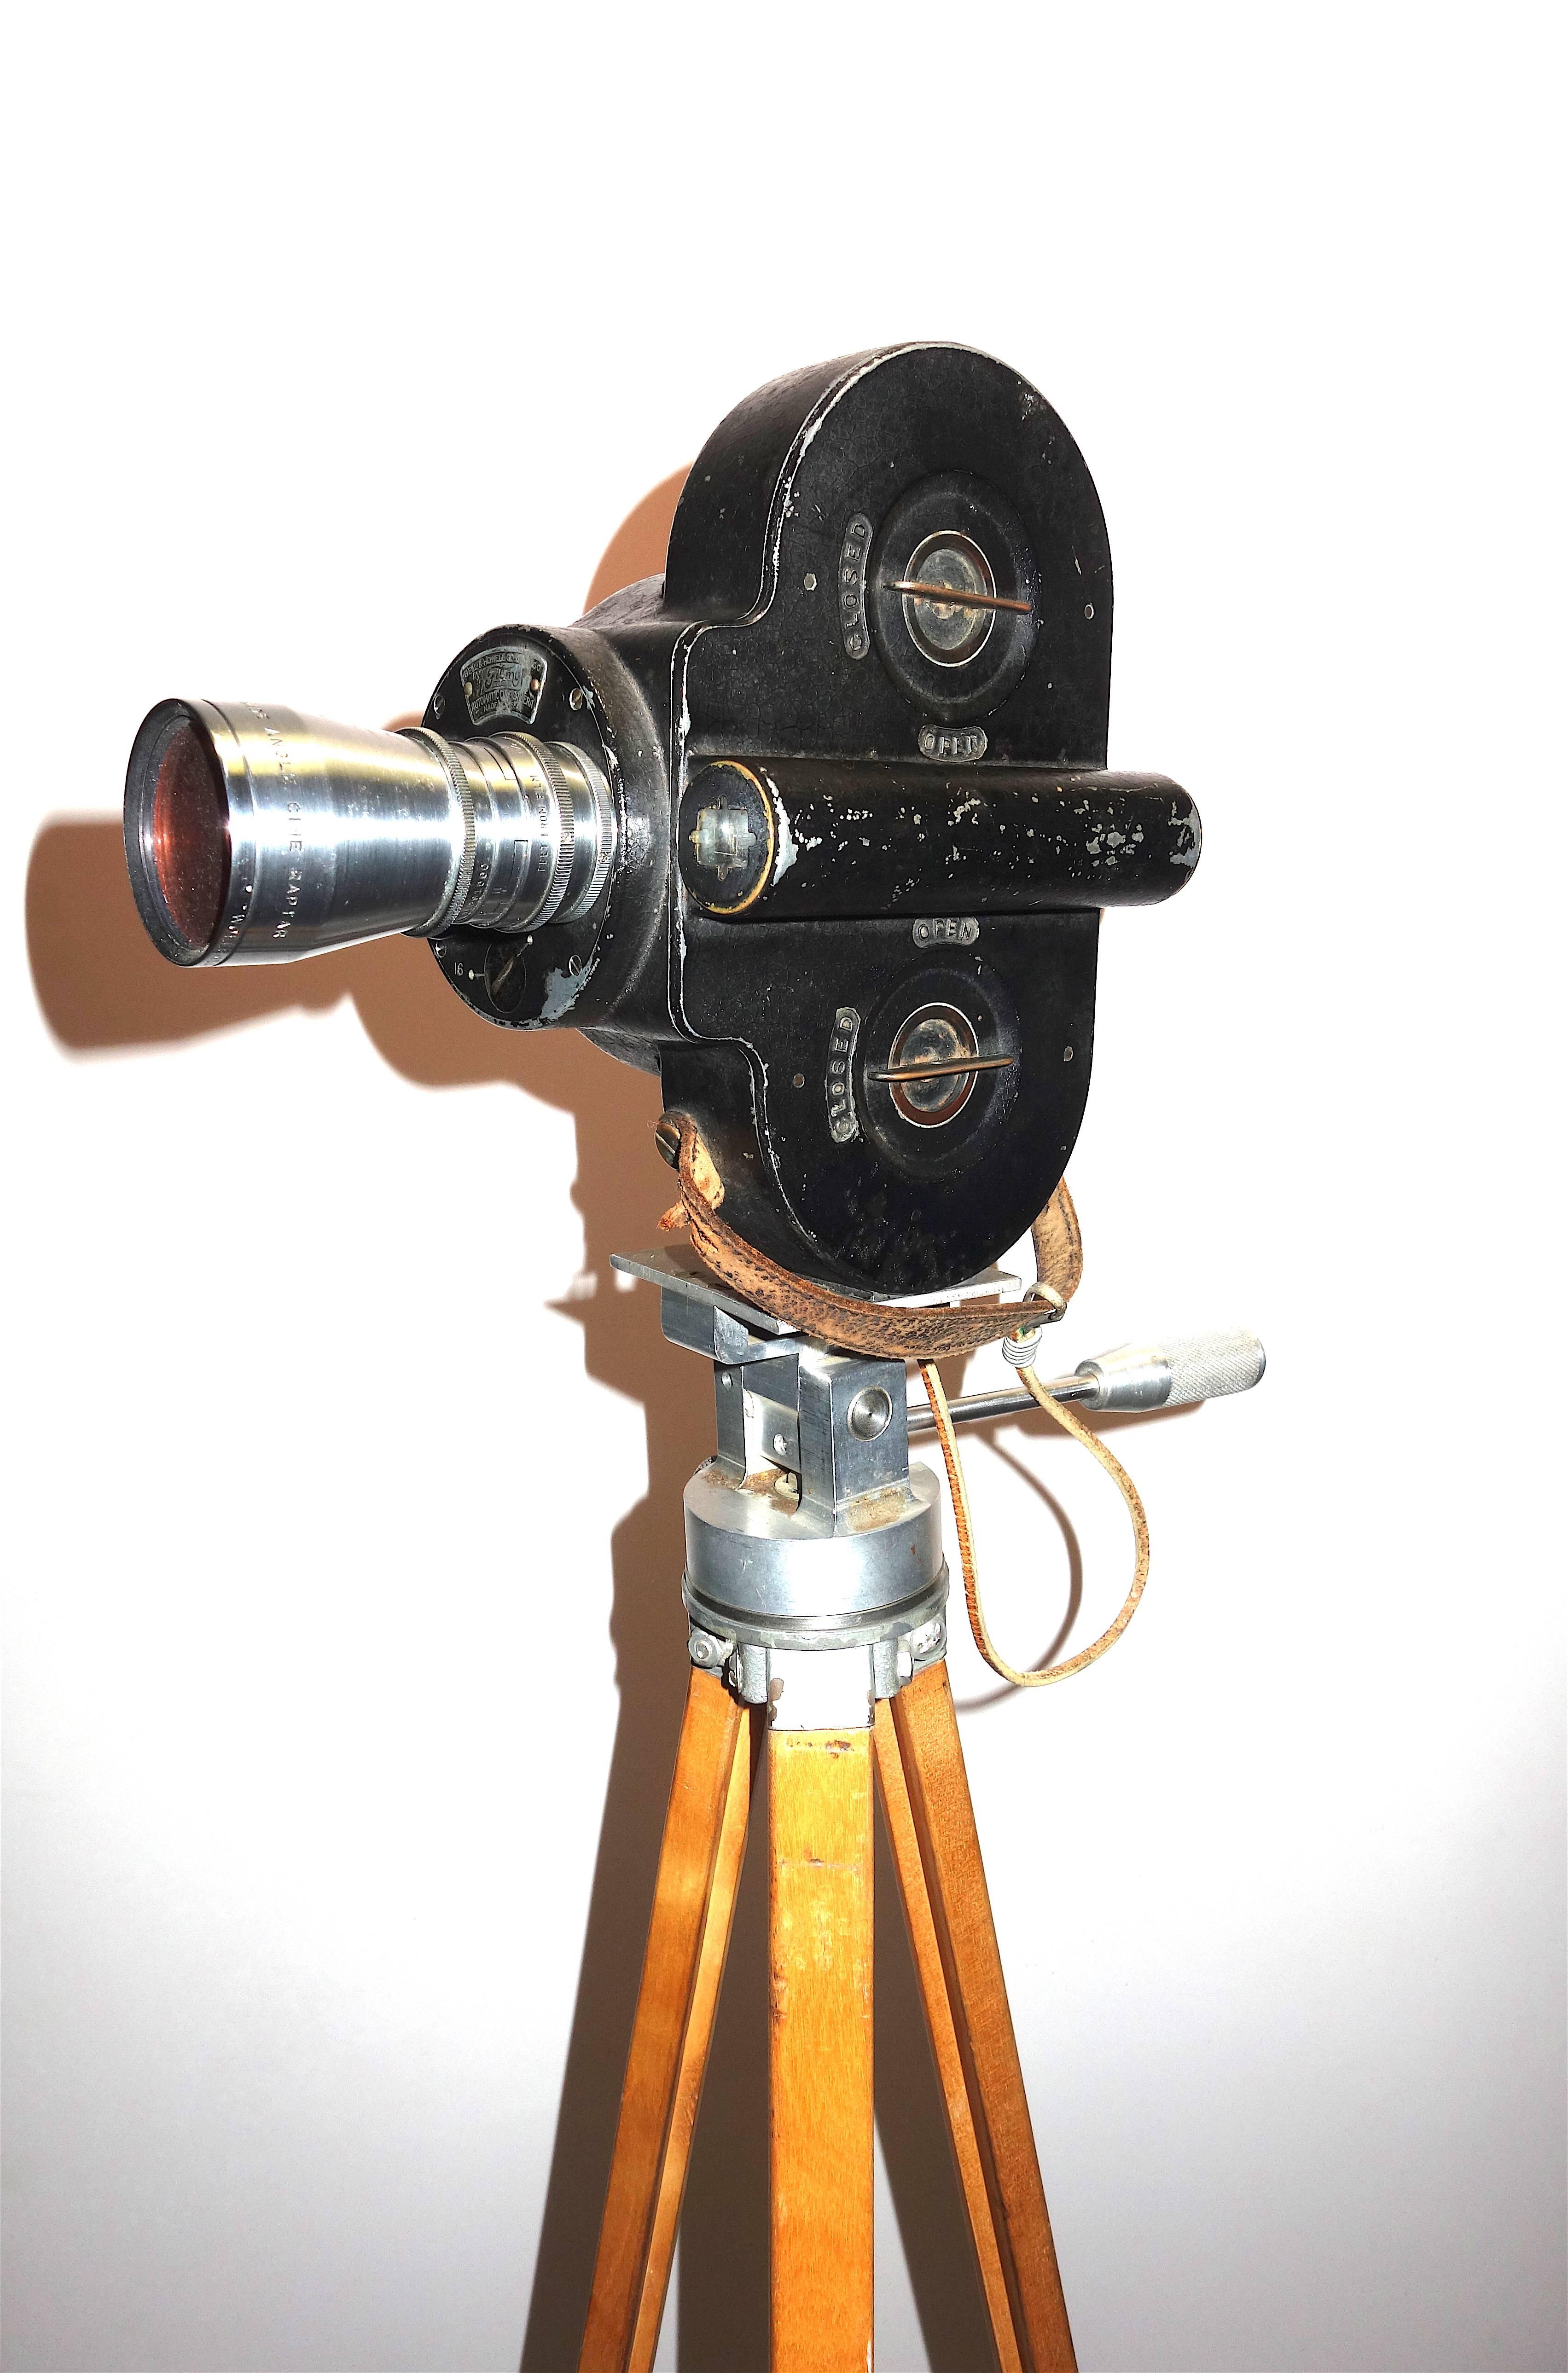 Offered for your approval is this early 20th century USA made Bell & Howell 16mm motion picture camera displayed on vintage wood tripod legs.

This is an outstanding example of a 16mm professional camera with lens and early winding key sitting on